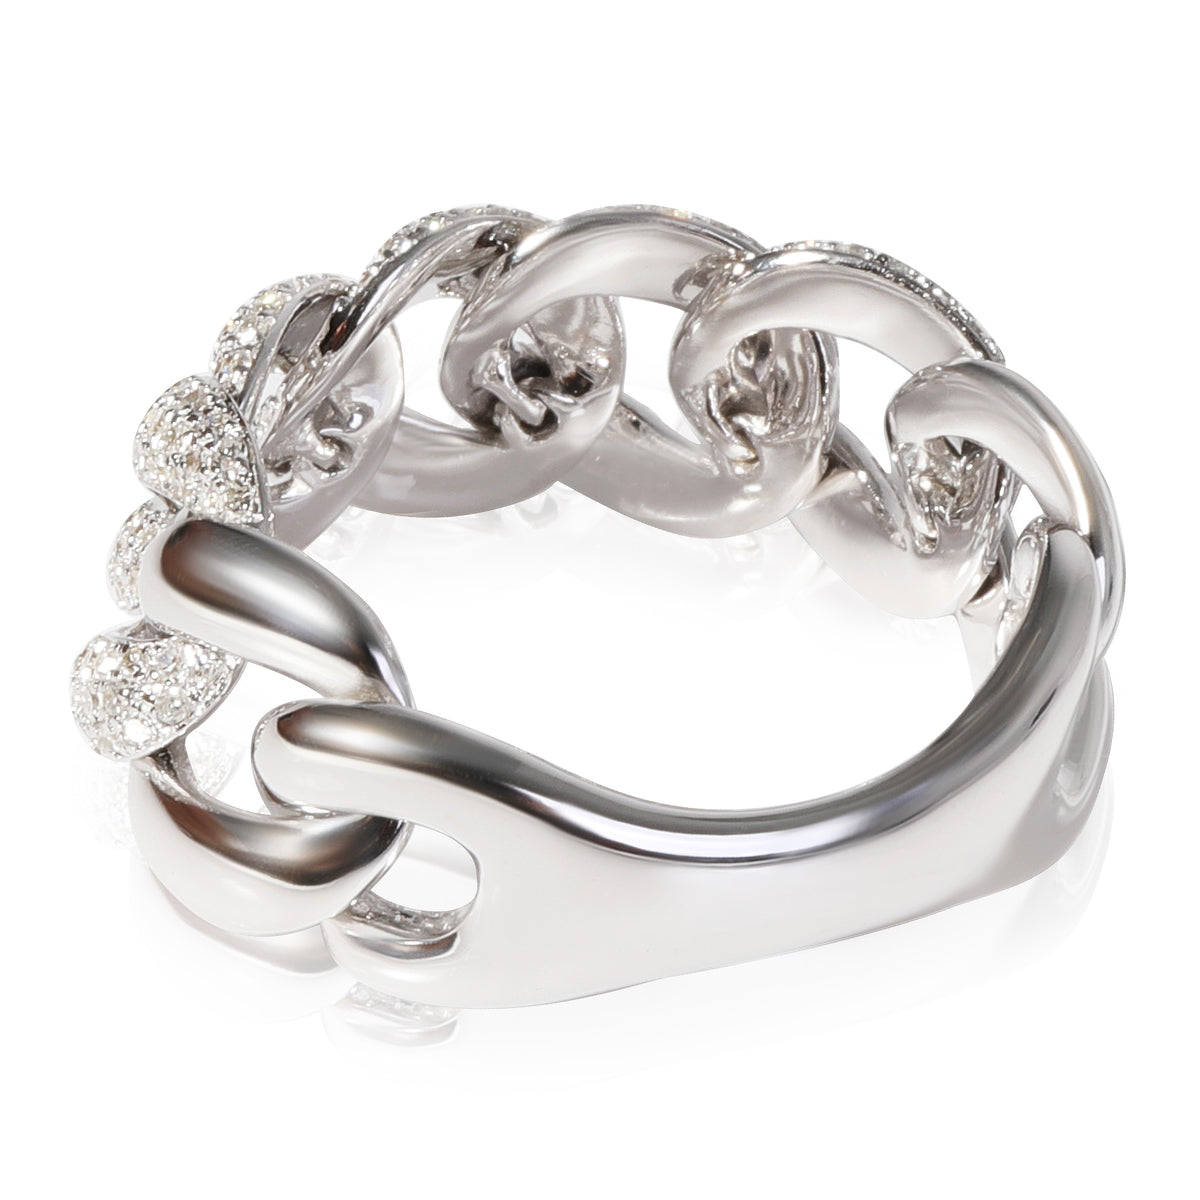 Diamond Curb Link Ring in 14kt White Gold 0.5 CTW